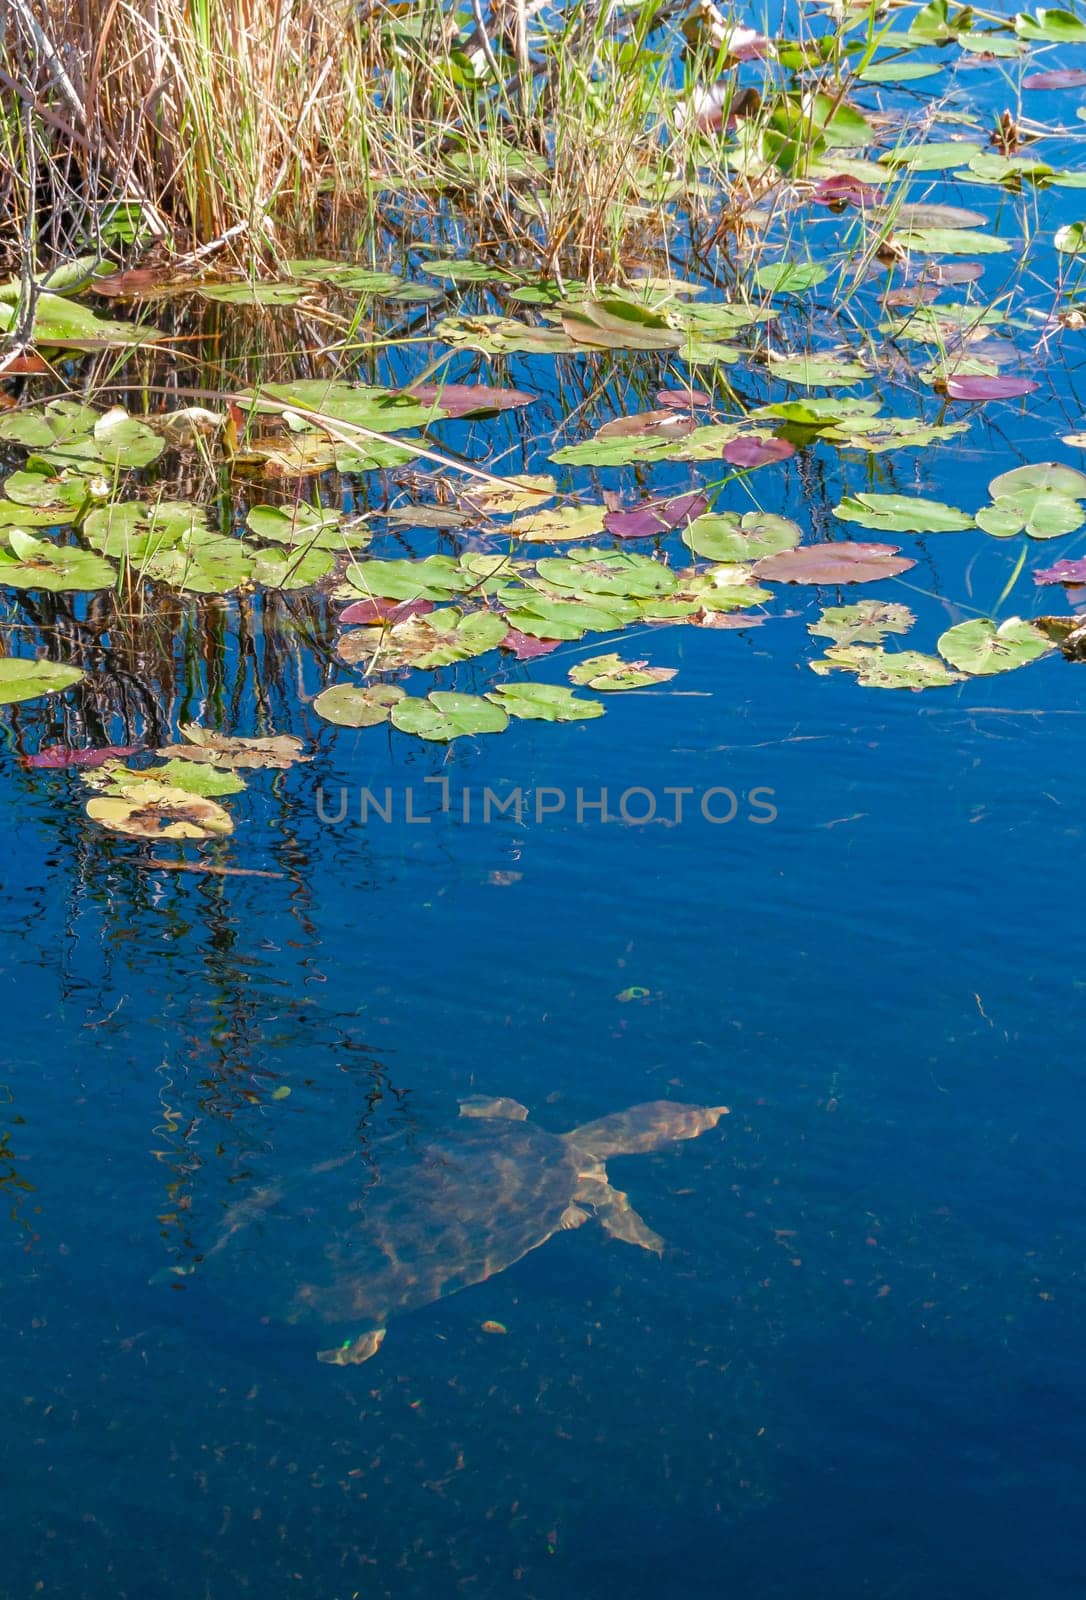 Freshwater turtle in a lake in Okefenoke National Park, Florida